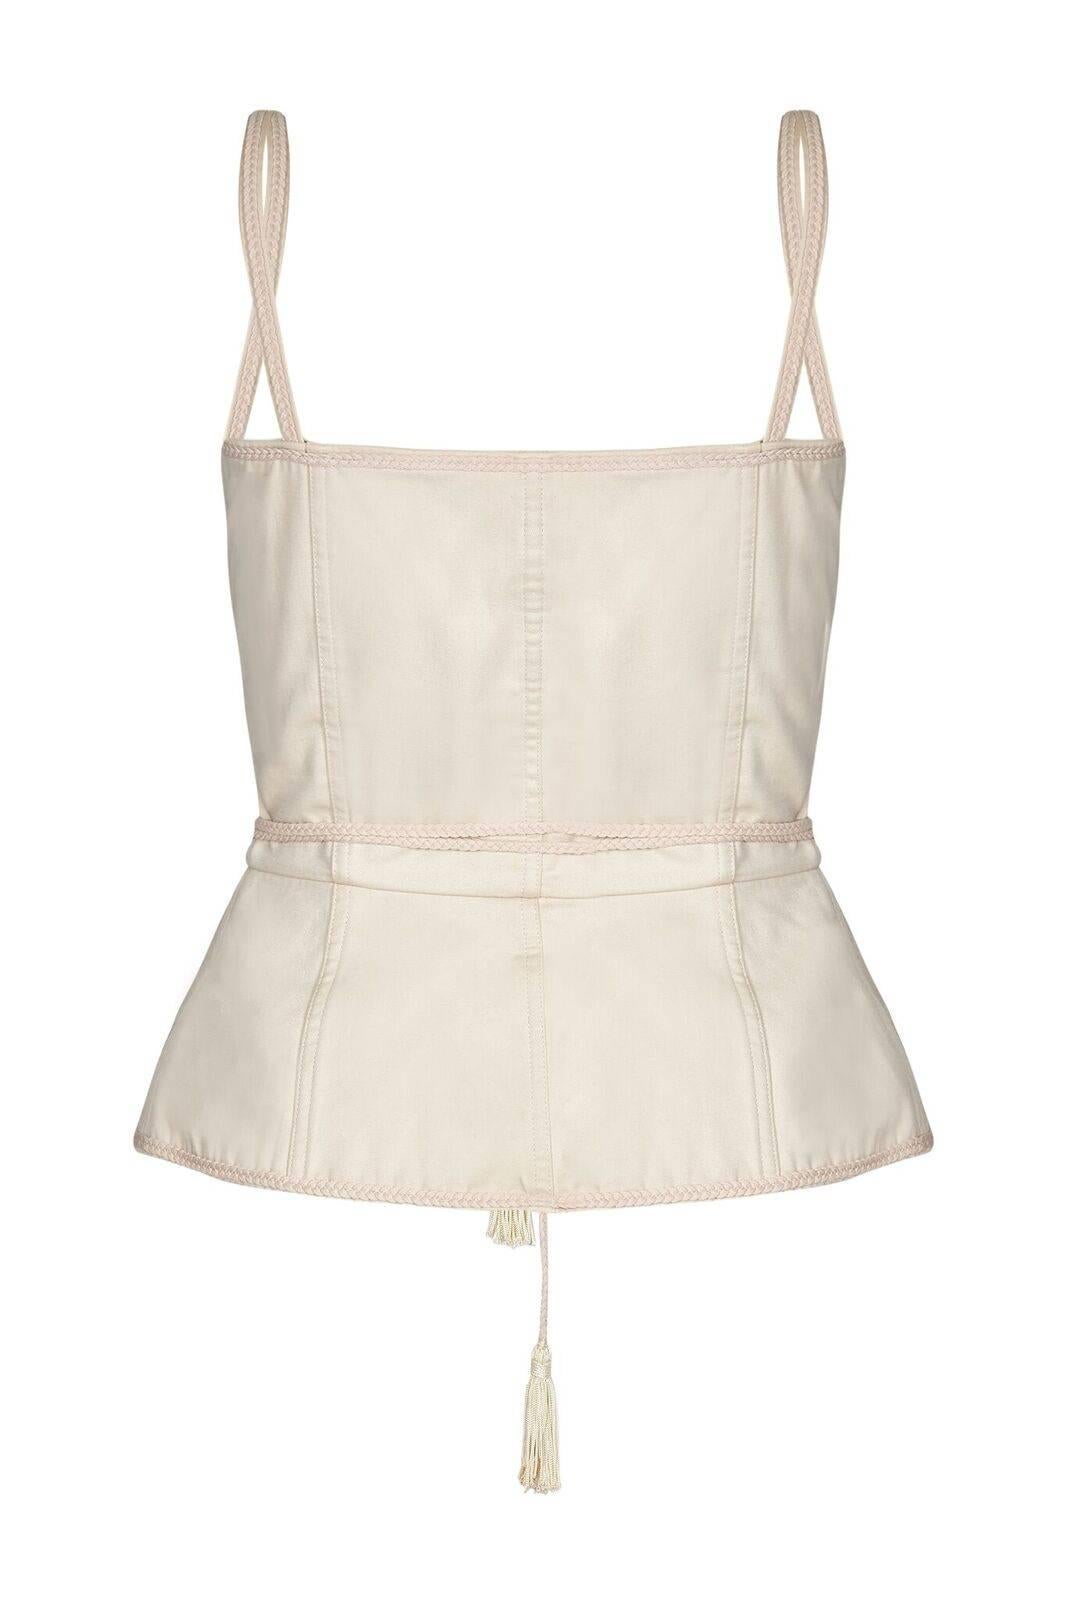 This iconic Yves Saint Laurent ivory beige cotton peasant corset top with front lacing is part of the designer's revolutionary Russian collection of Autumn/Winter 1976. Instantly recognisable, this highly sought after piece features a seven-hole